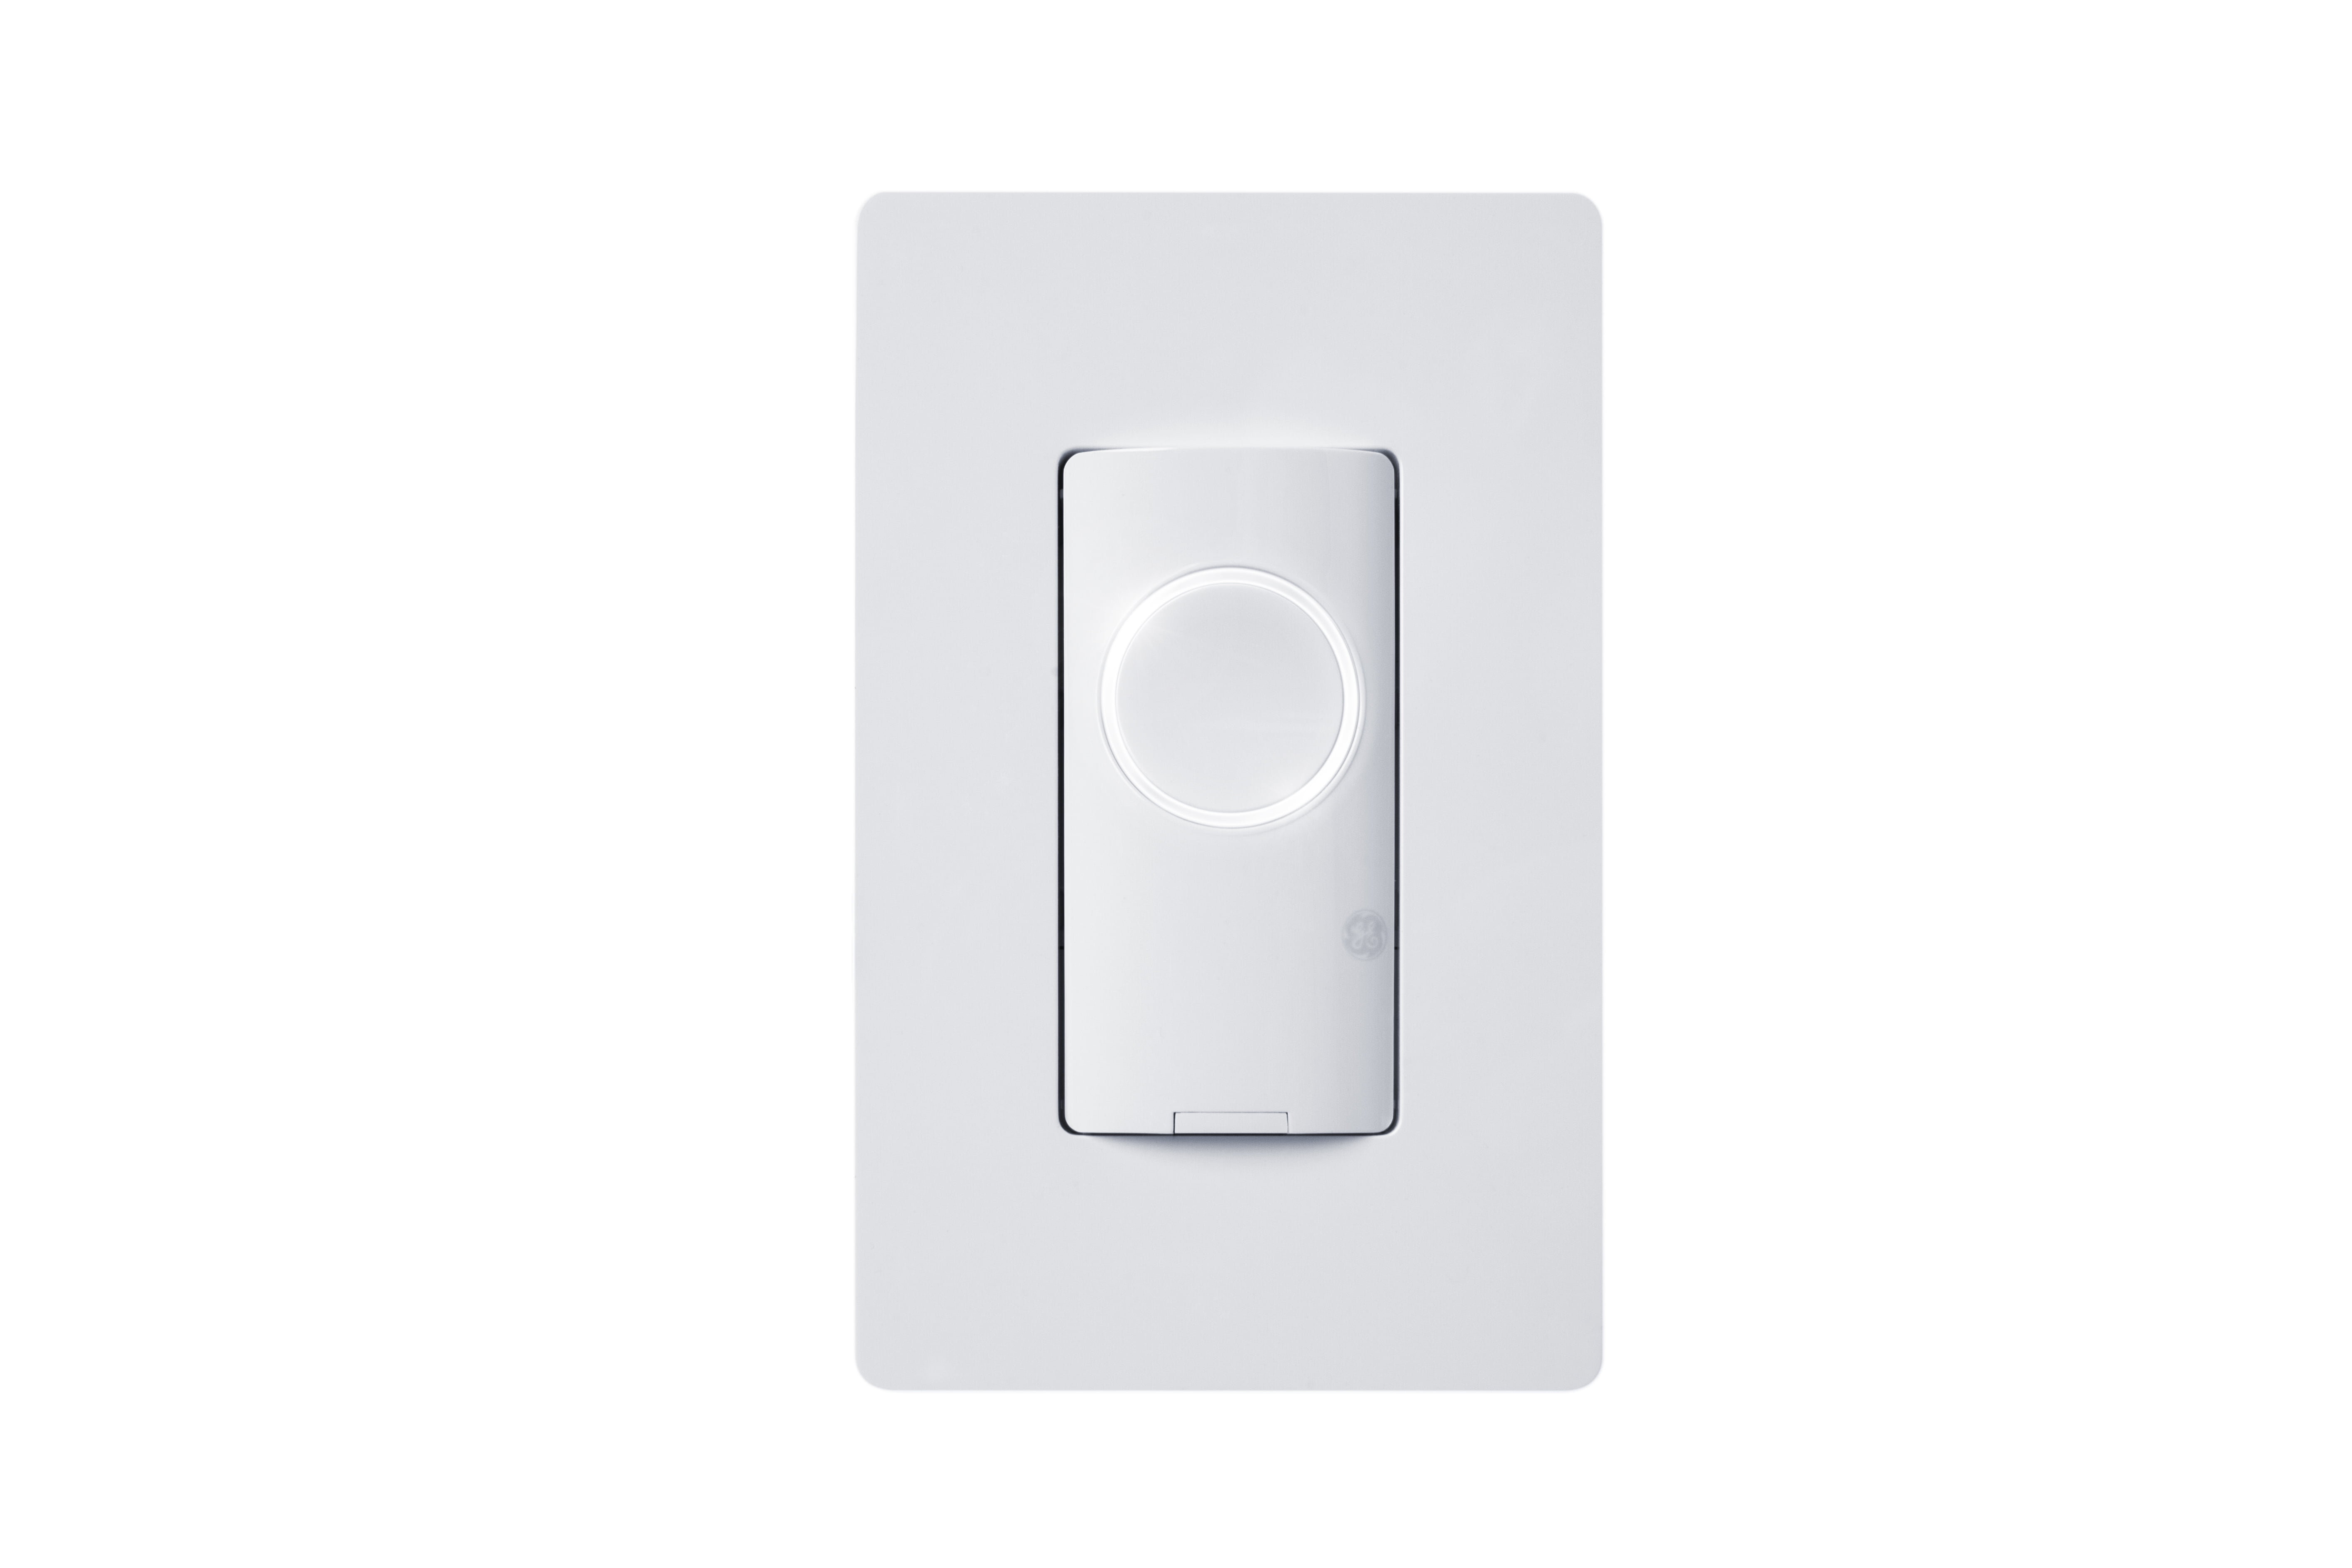 Details about   C by GE No Hub Required On/Off 3-Wire Wi-Fi Smart Switch 